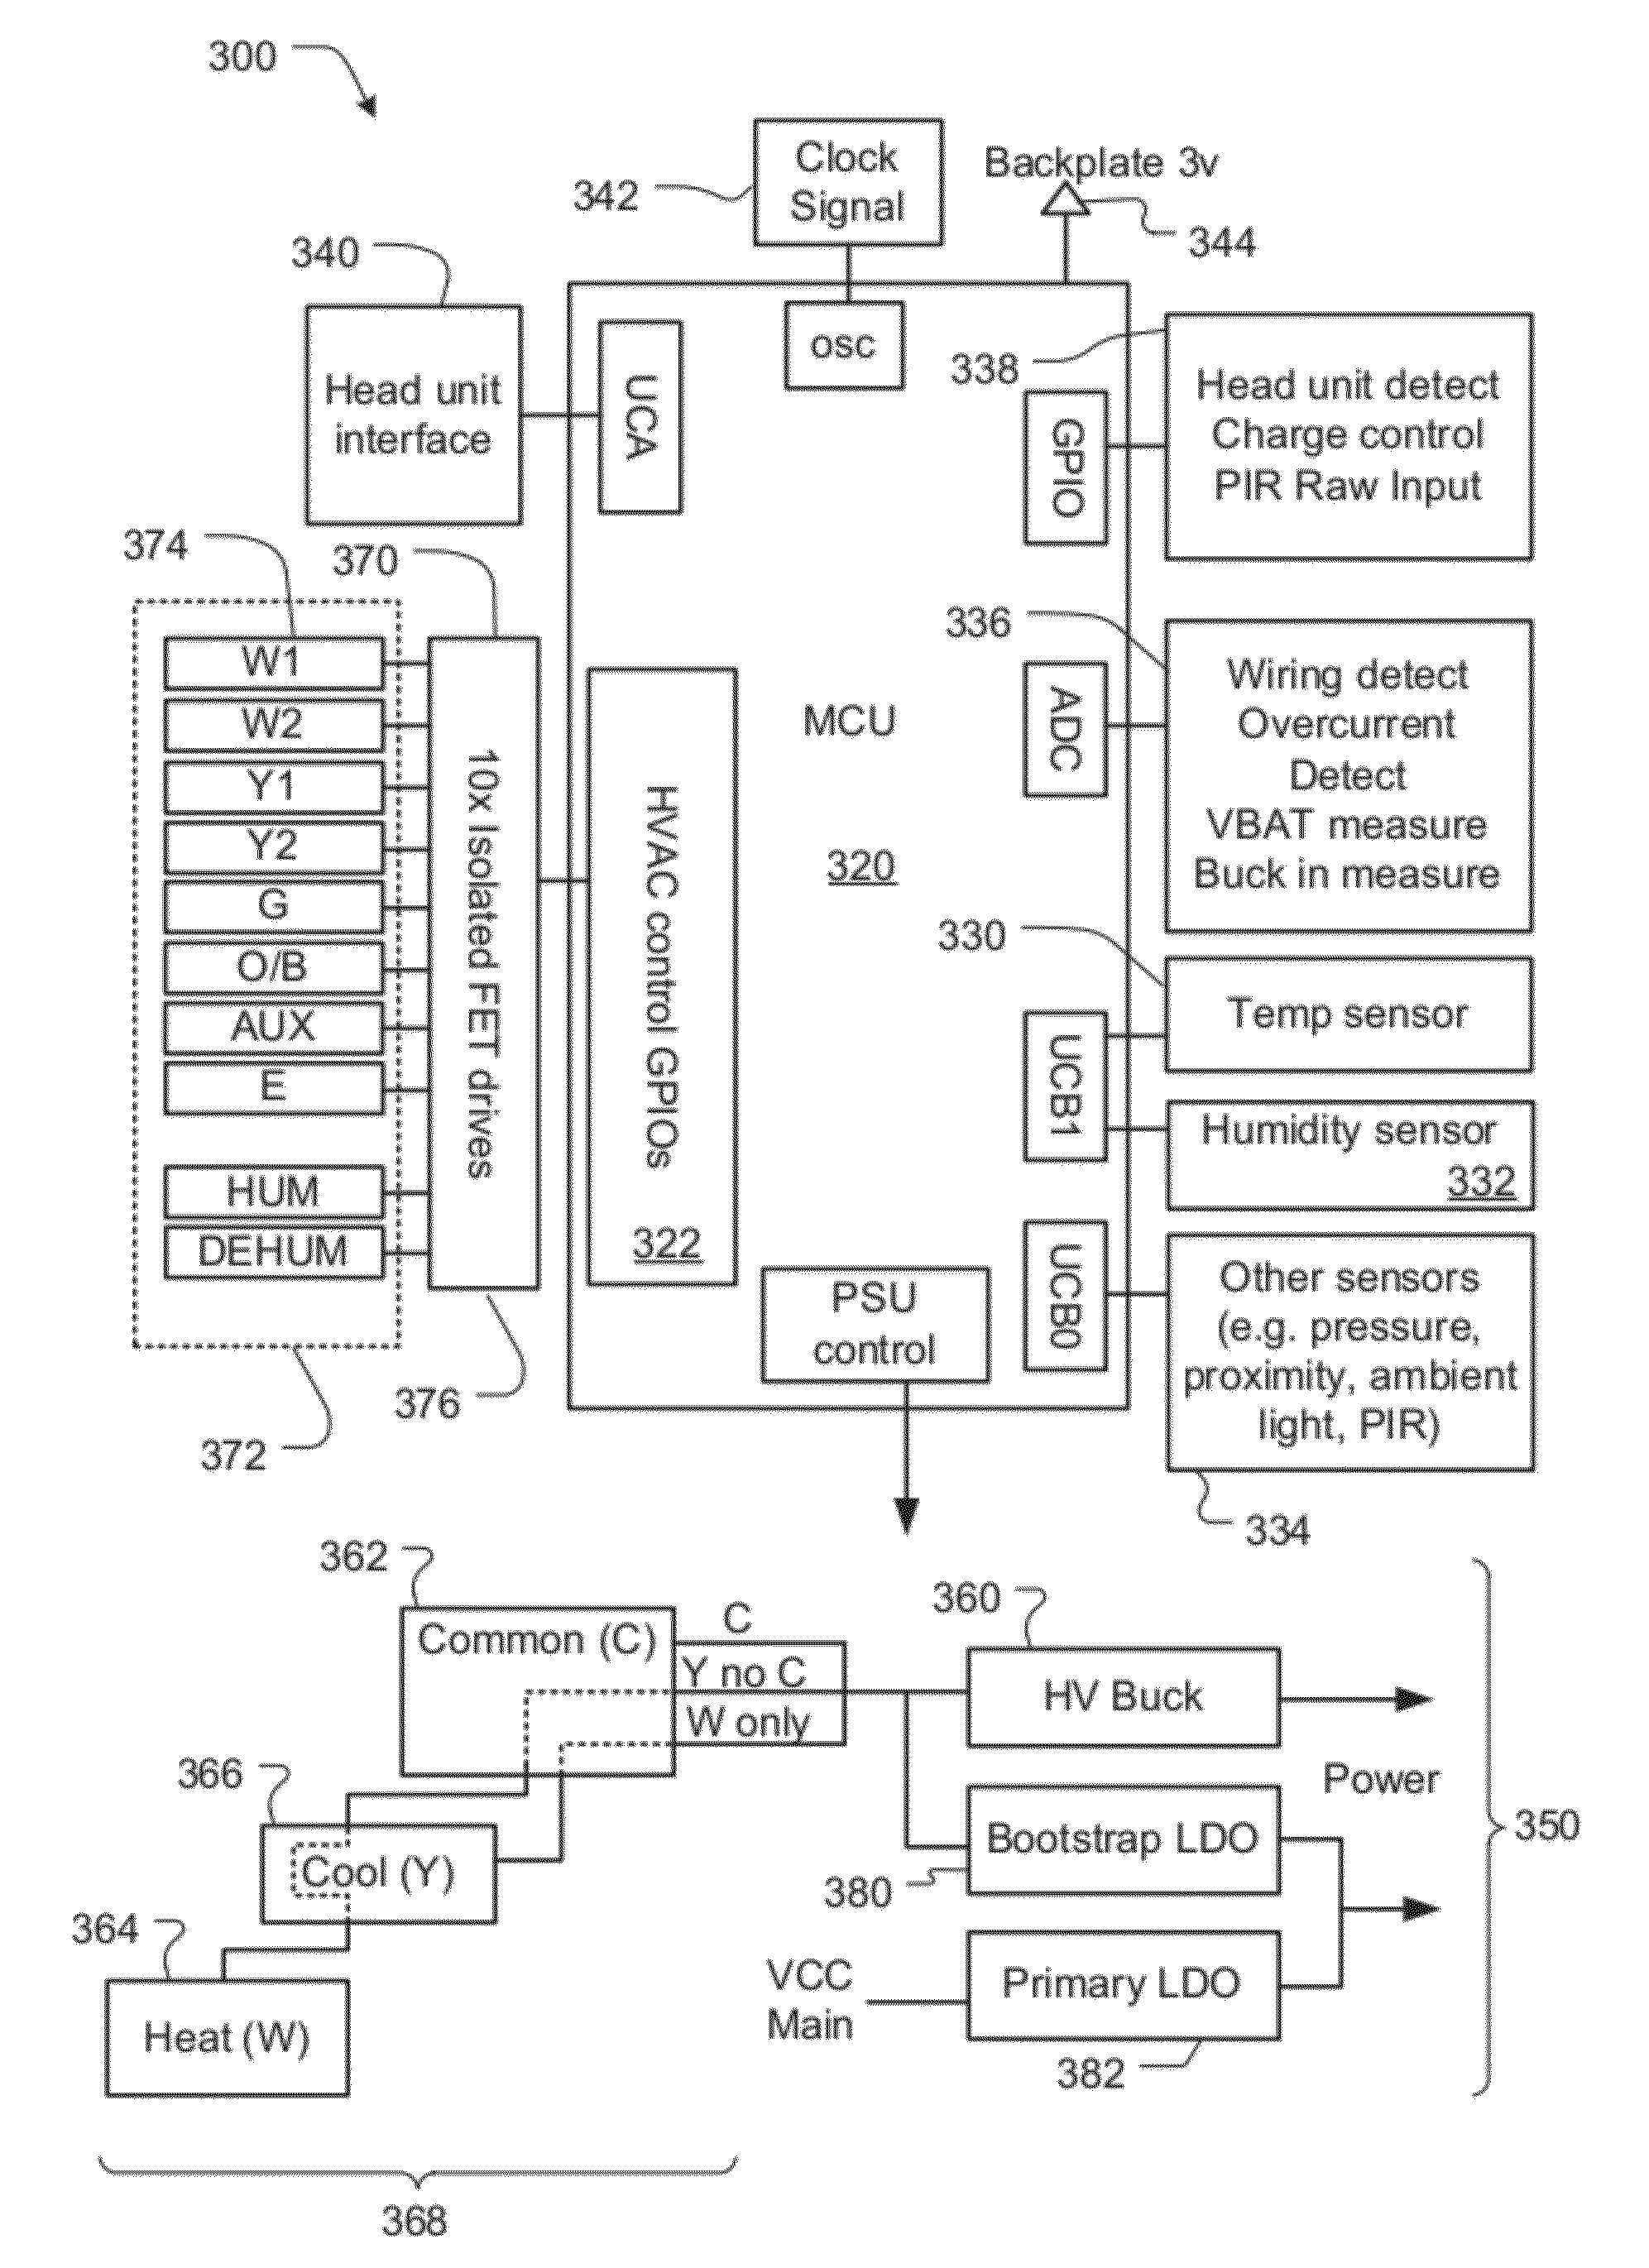 Thermostat with self-configuring connections to facilitate do-it-yourself installation